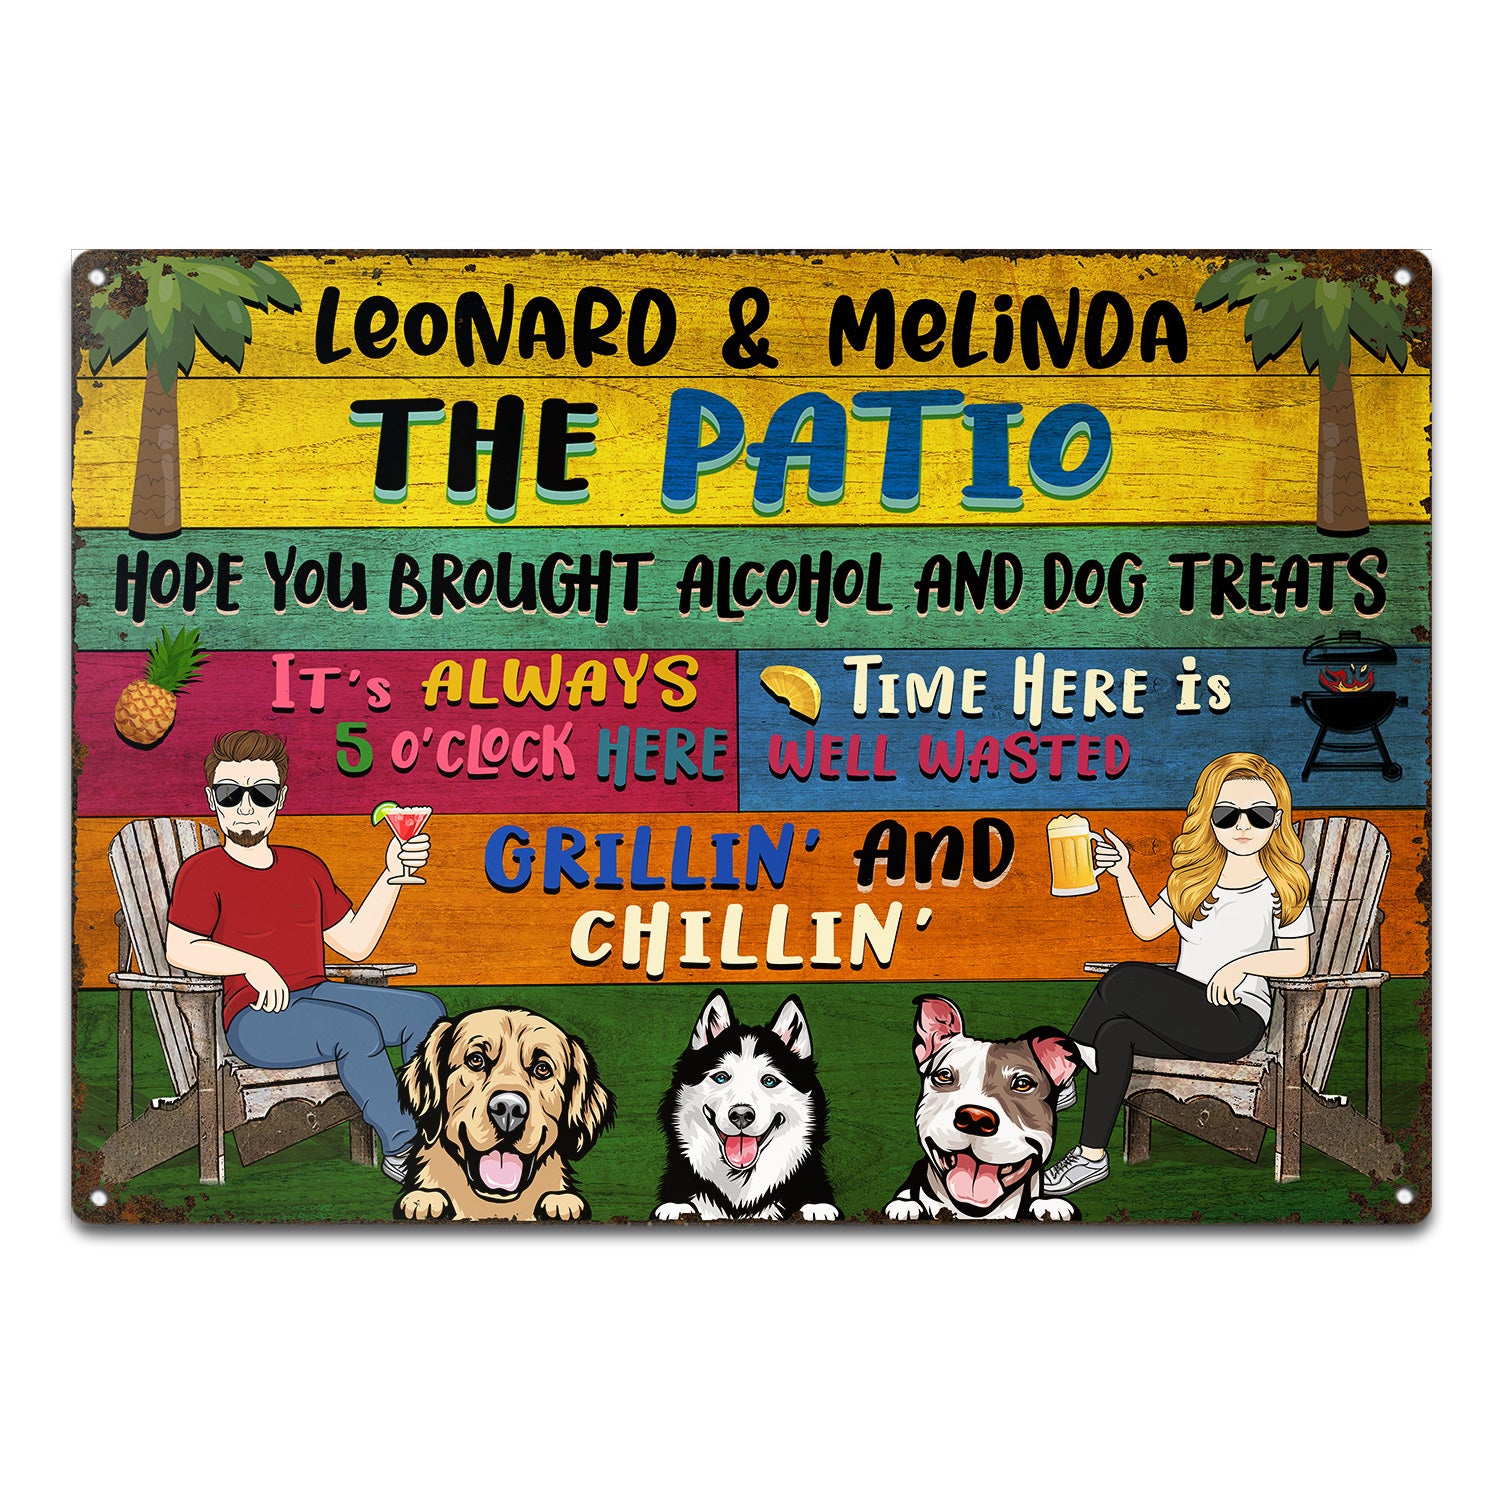 Patio Welcome Grilling Hope You Brought Alcohol Couple Single - Home Decor, Backyard Decor, Gift For Her, Him, Family, Dog Lovers - Personalized Custom Classic Metal Signs